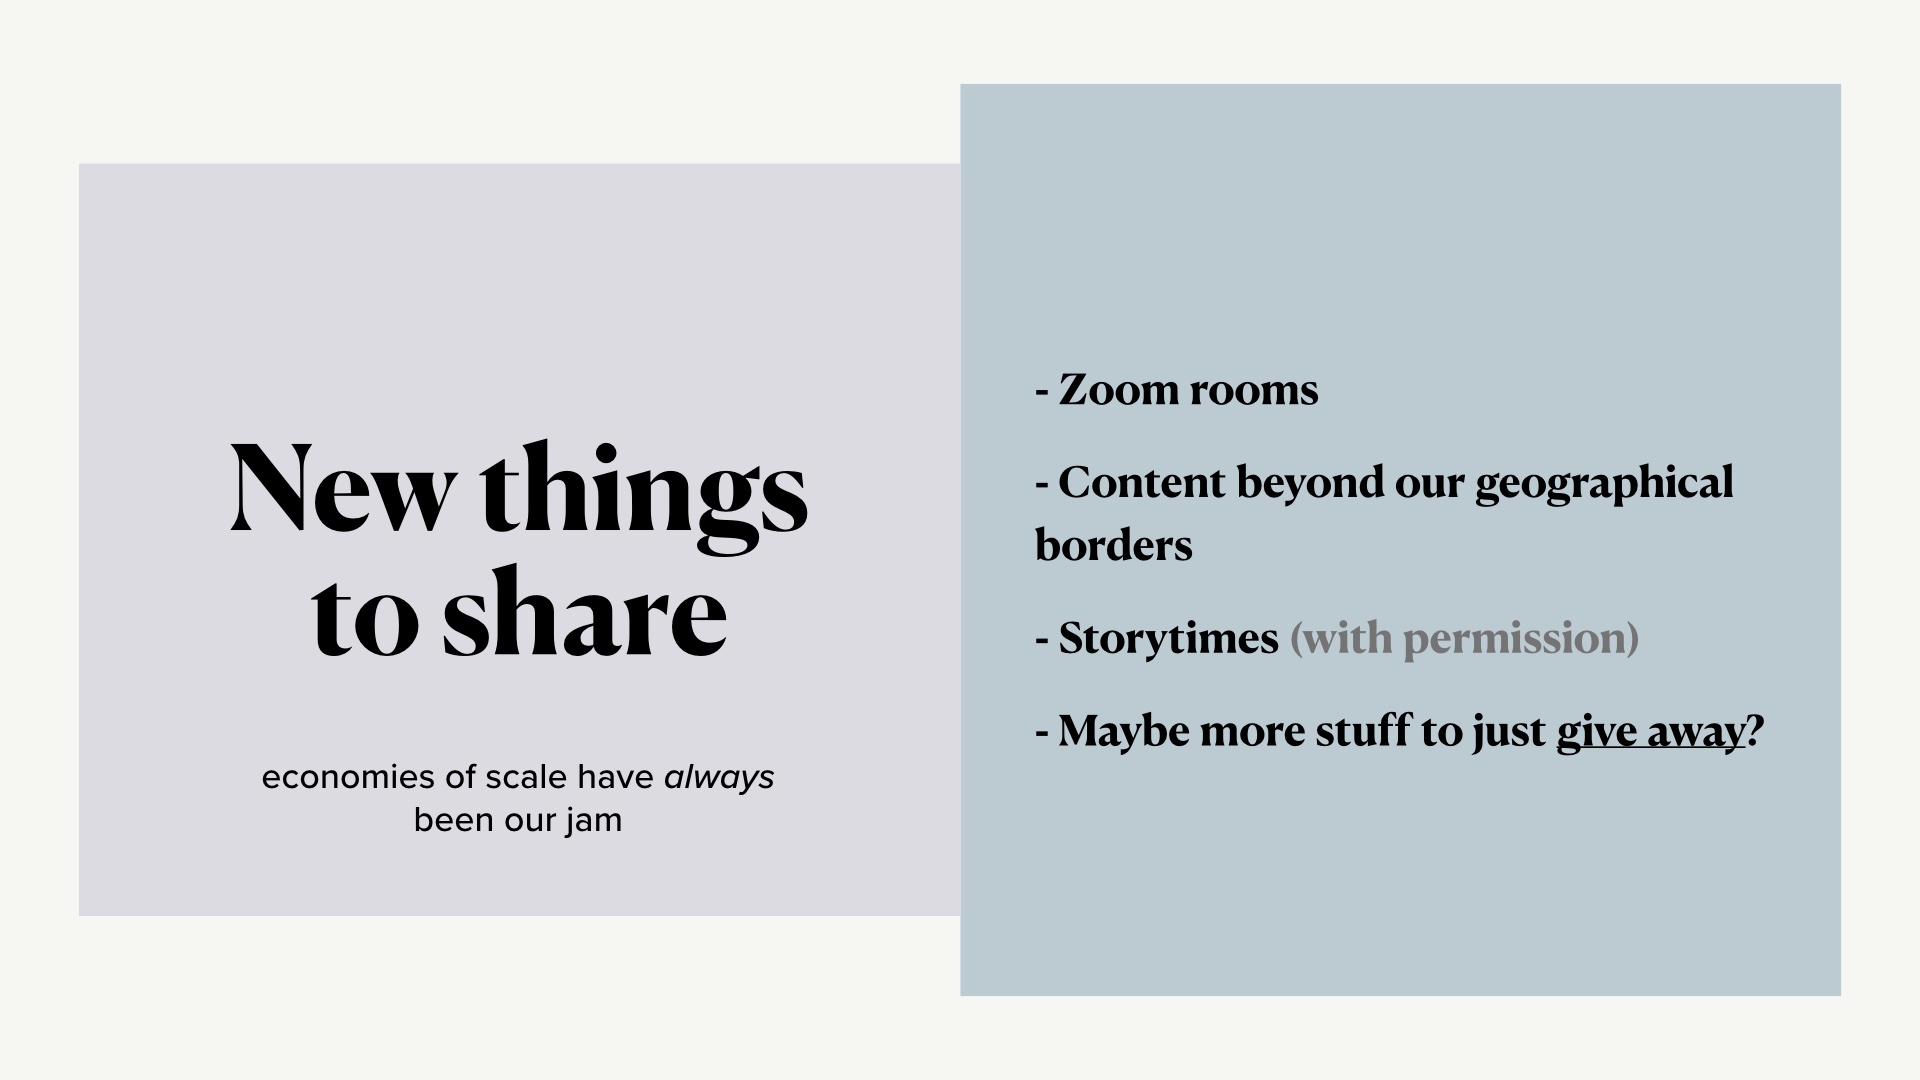 [caption: New Things to Share: - Zoom rooms - Content beyond our geographical borders - Storytimes (with permission) - Maybe more stuff to just give away?]